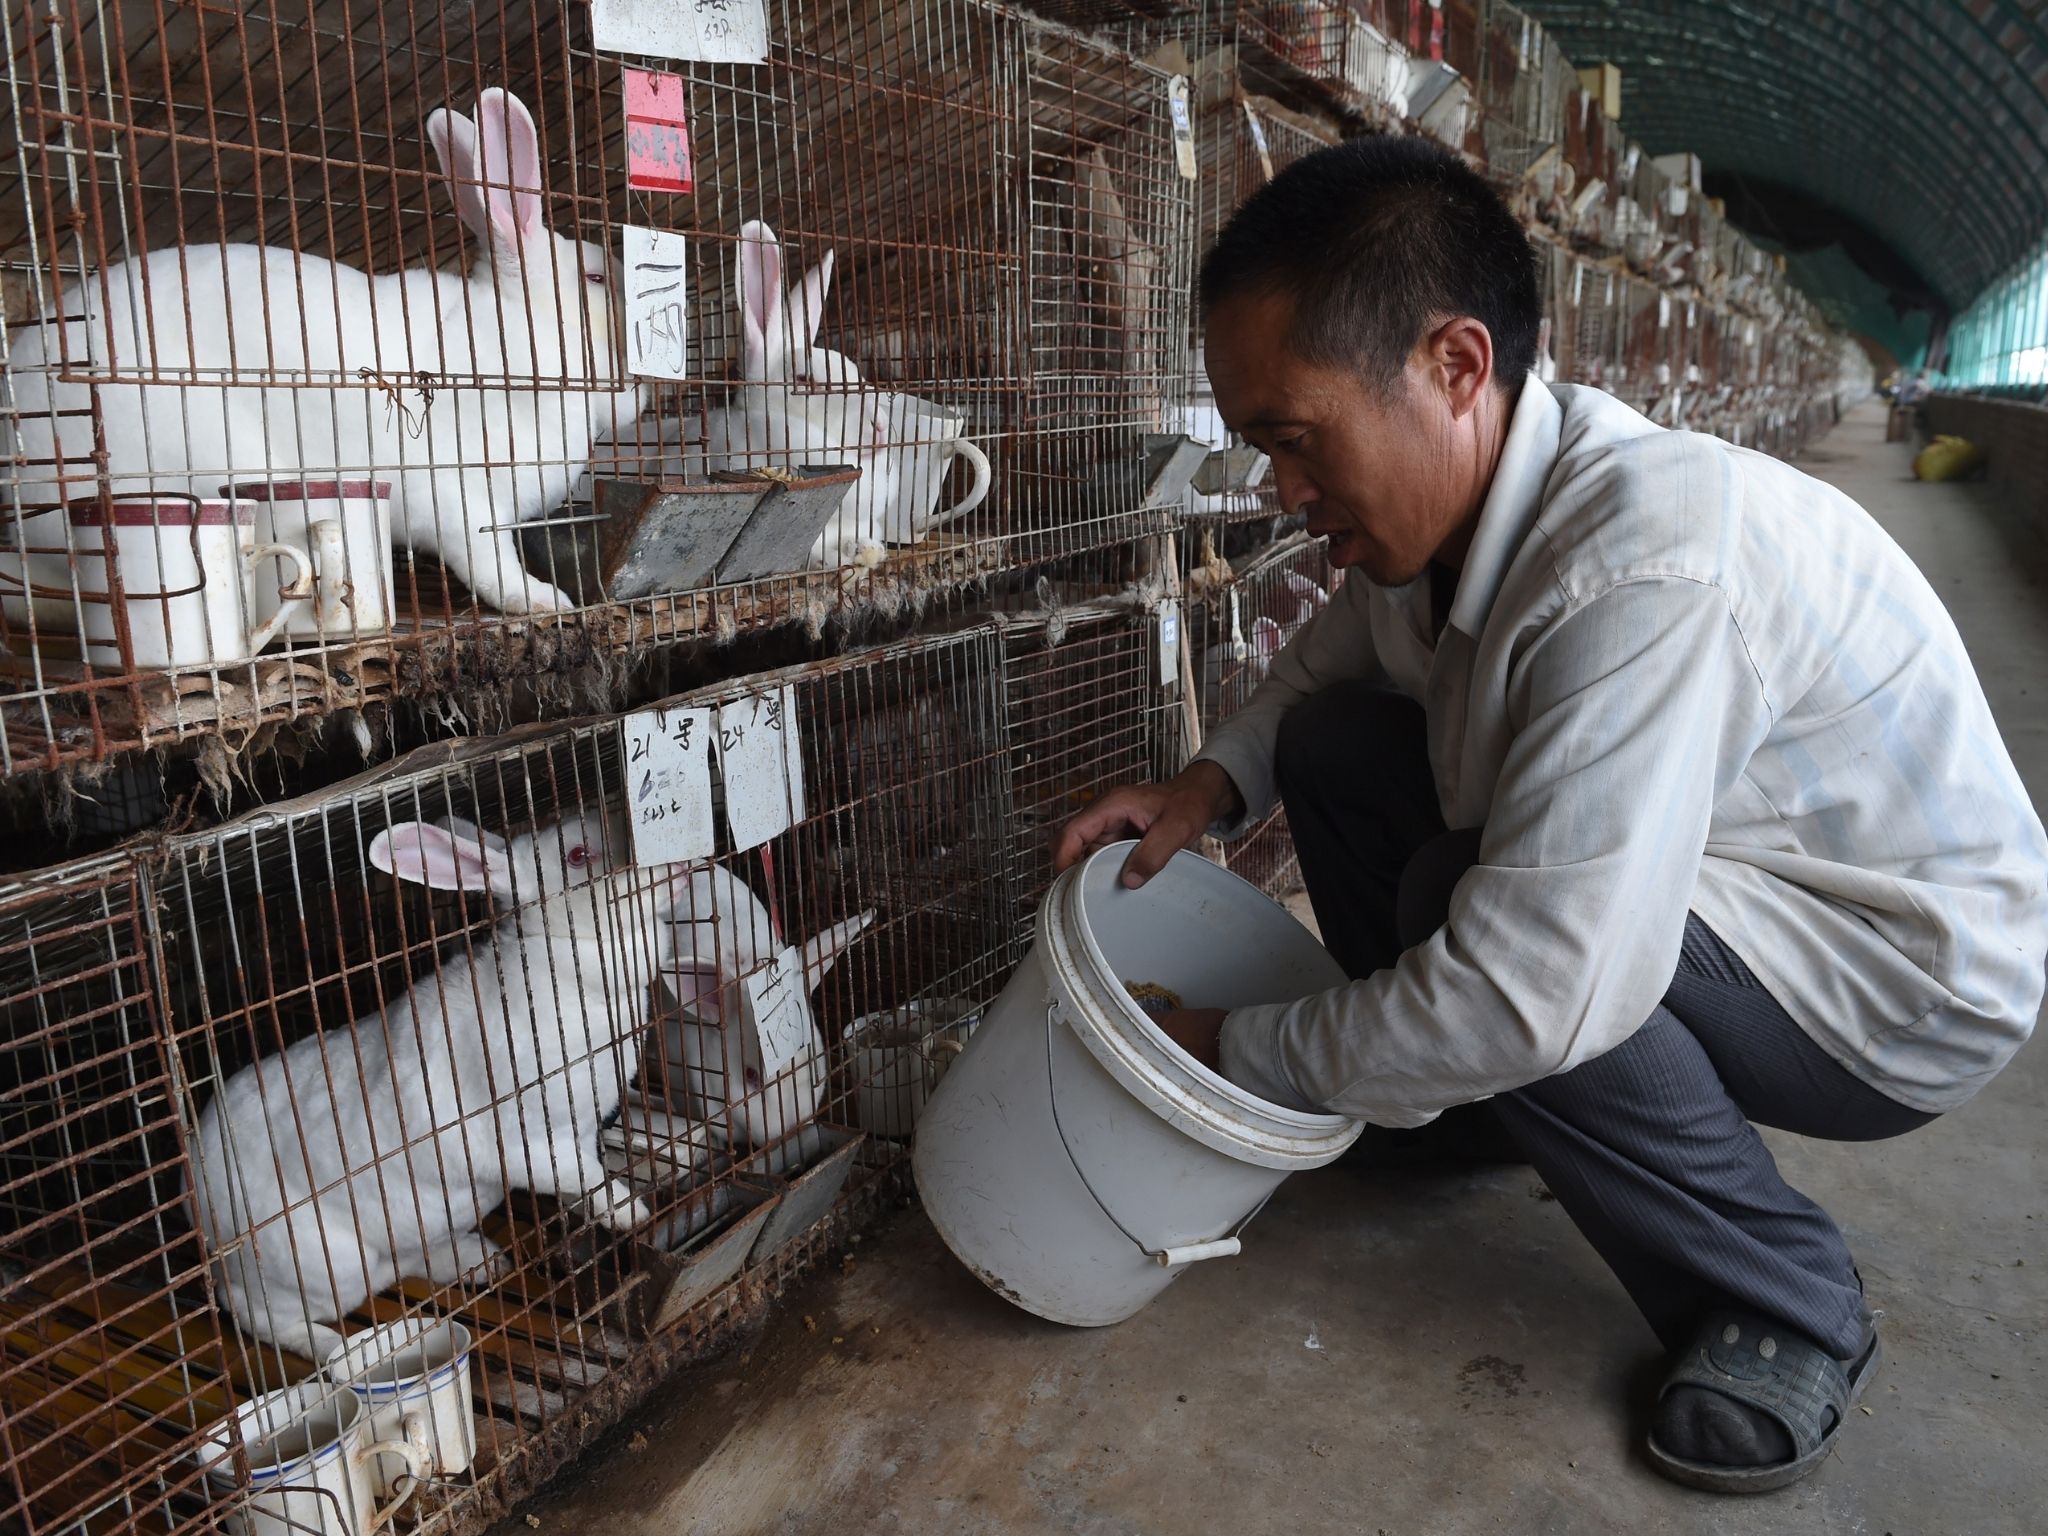 A man feeds rabbits at a farm which breeds animals for fur in Zhangjiakou, in China’s Hebei province